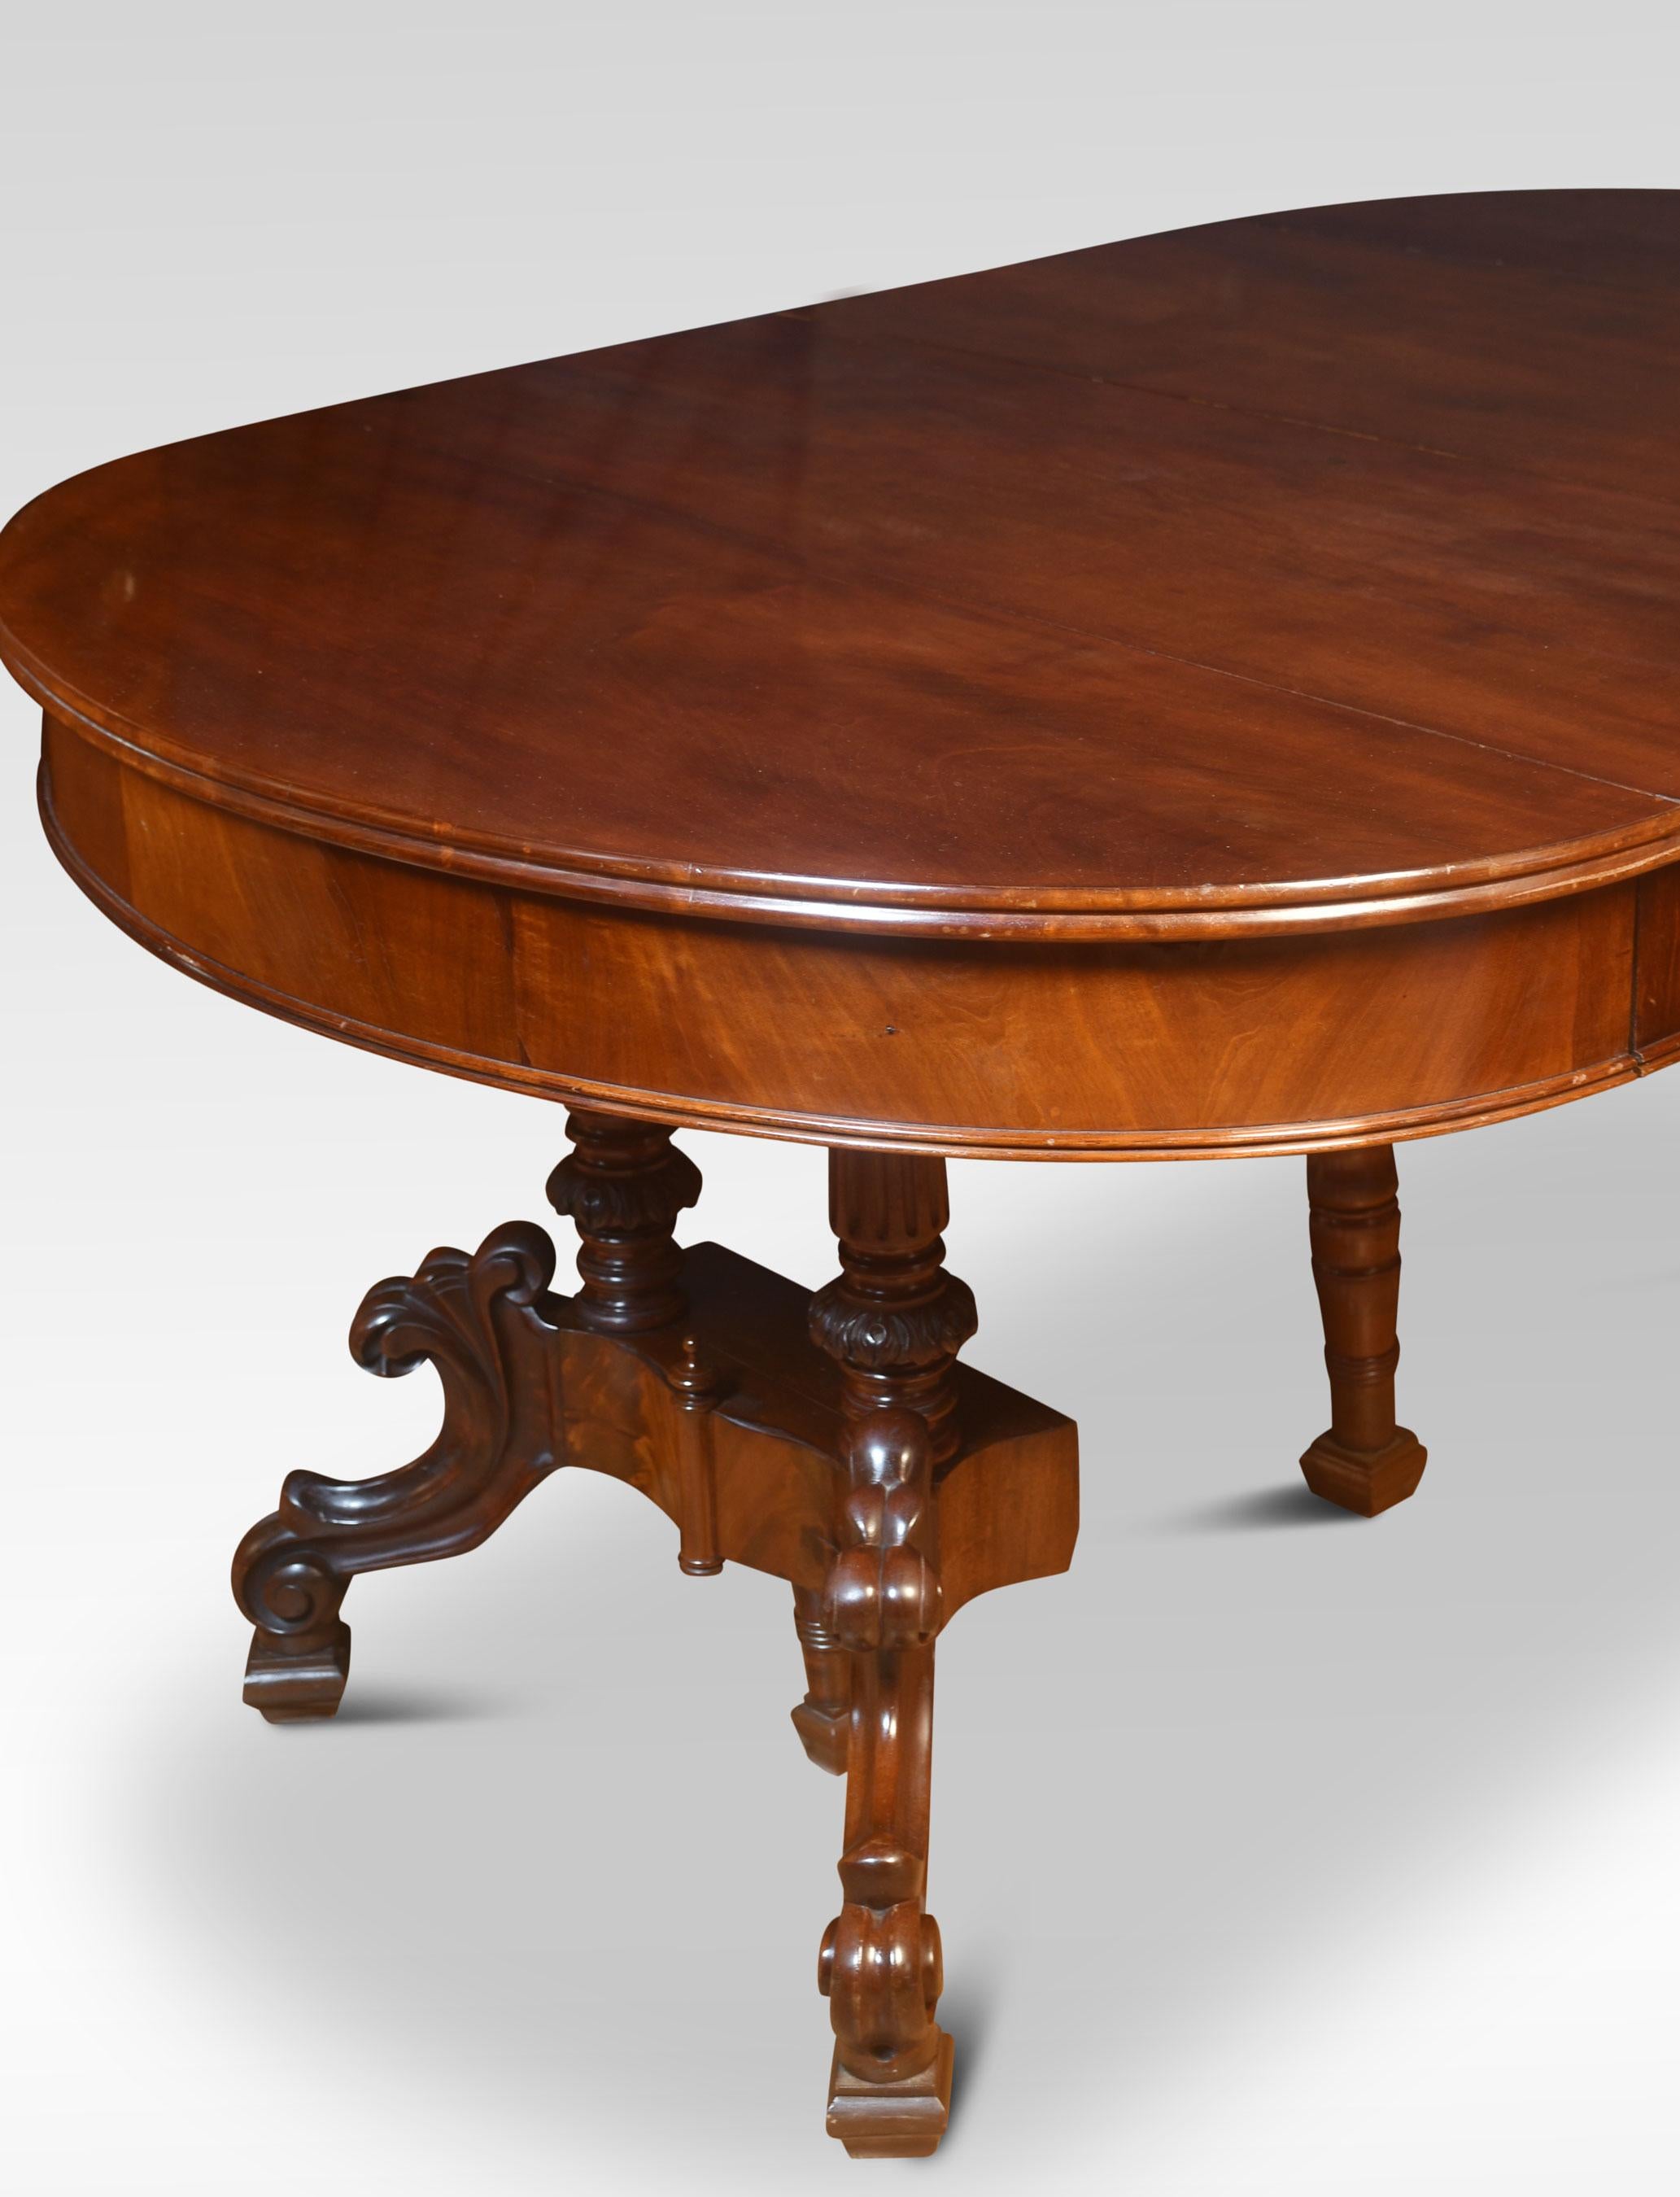 Mahogany dining table the oval top opening to incorporate two leaves, raised on a centre cluster column and scrolling legs.
Dimensions
Height 32.5 Inches
Width 37 Inches when open 75 Inches
Depth 50 Inches